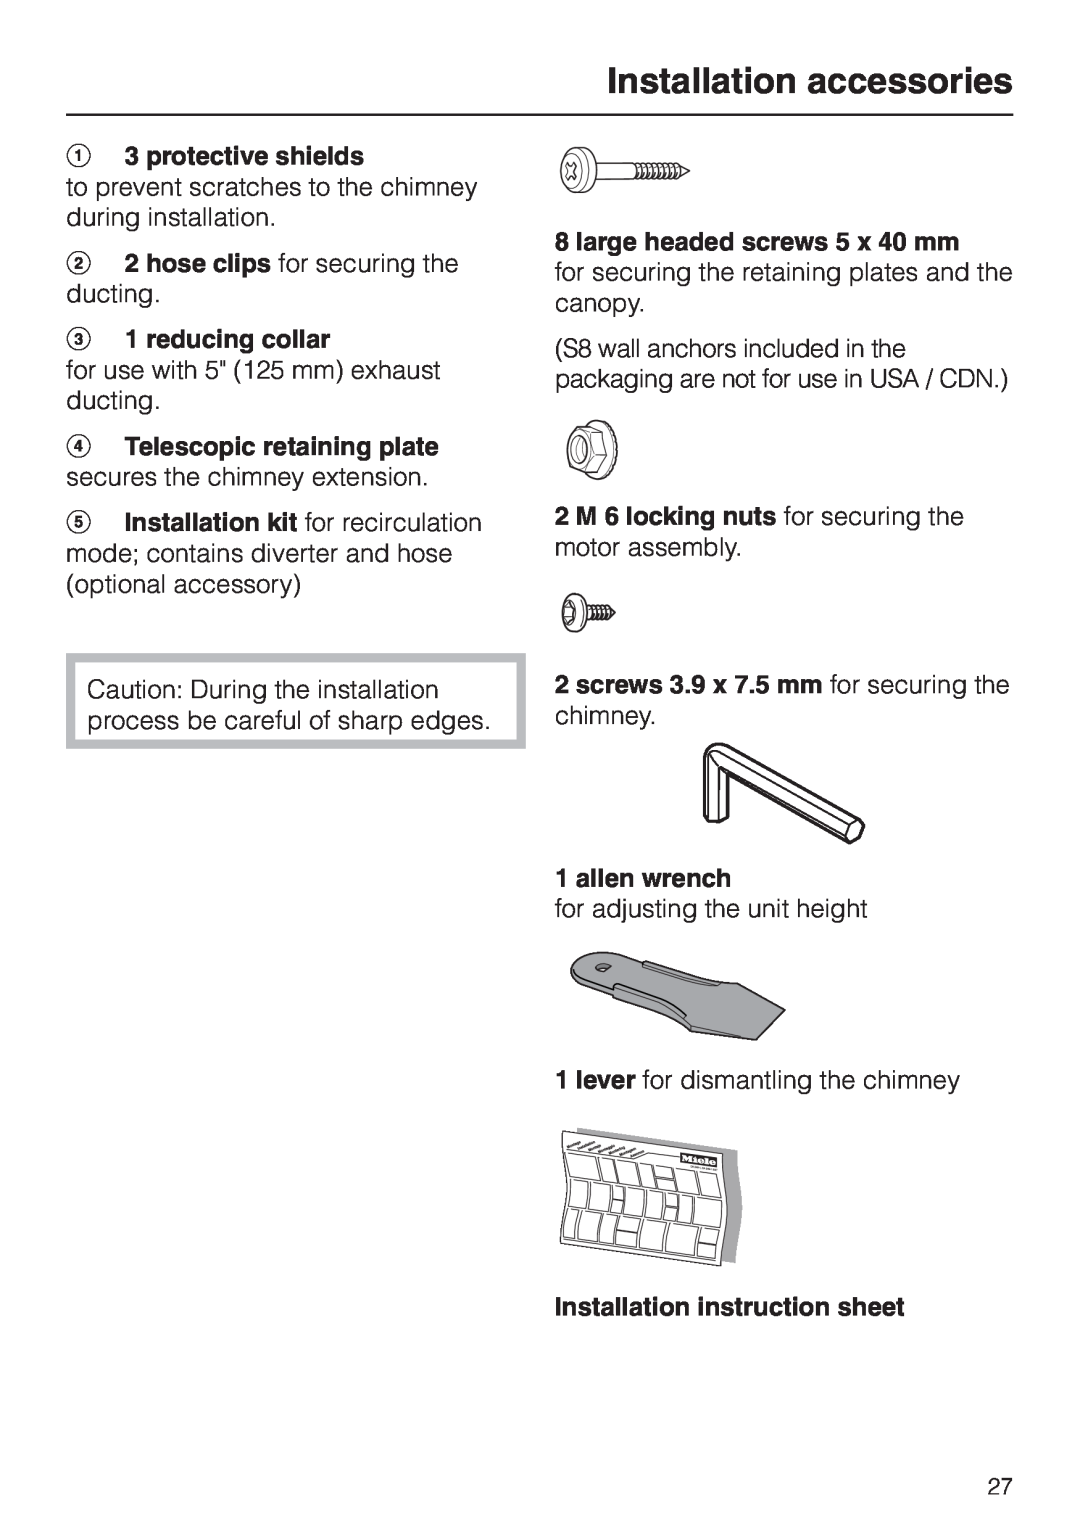 Miele DA 279-4 installation instructions Installation accessories, a3 protective shields 